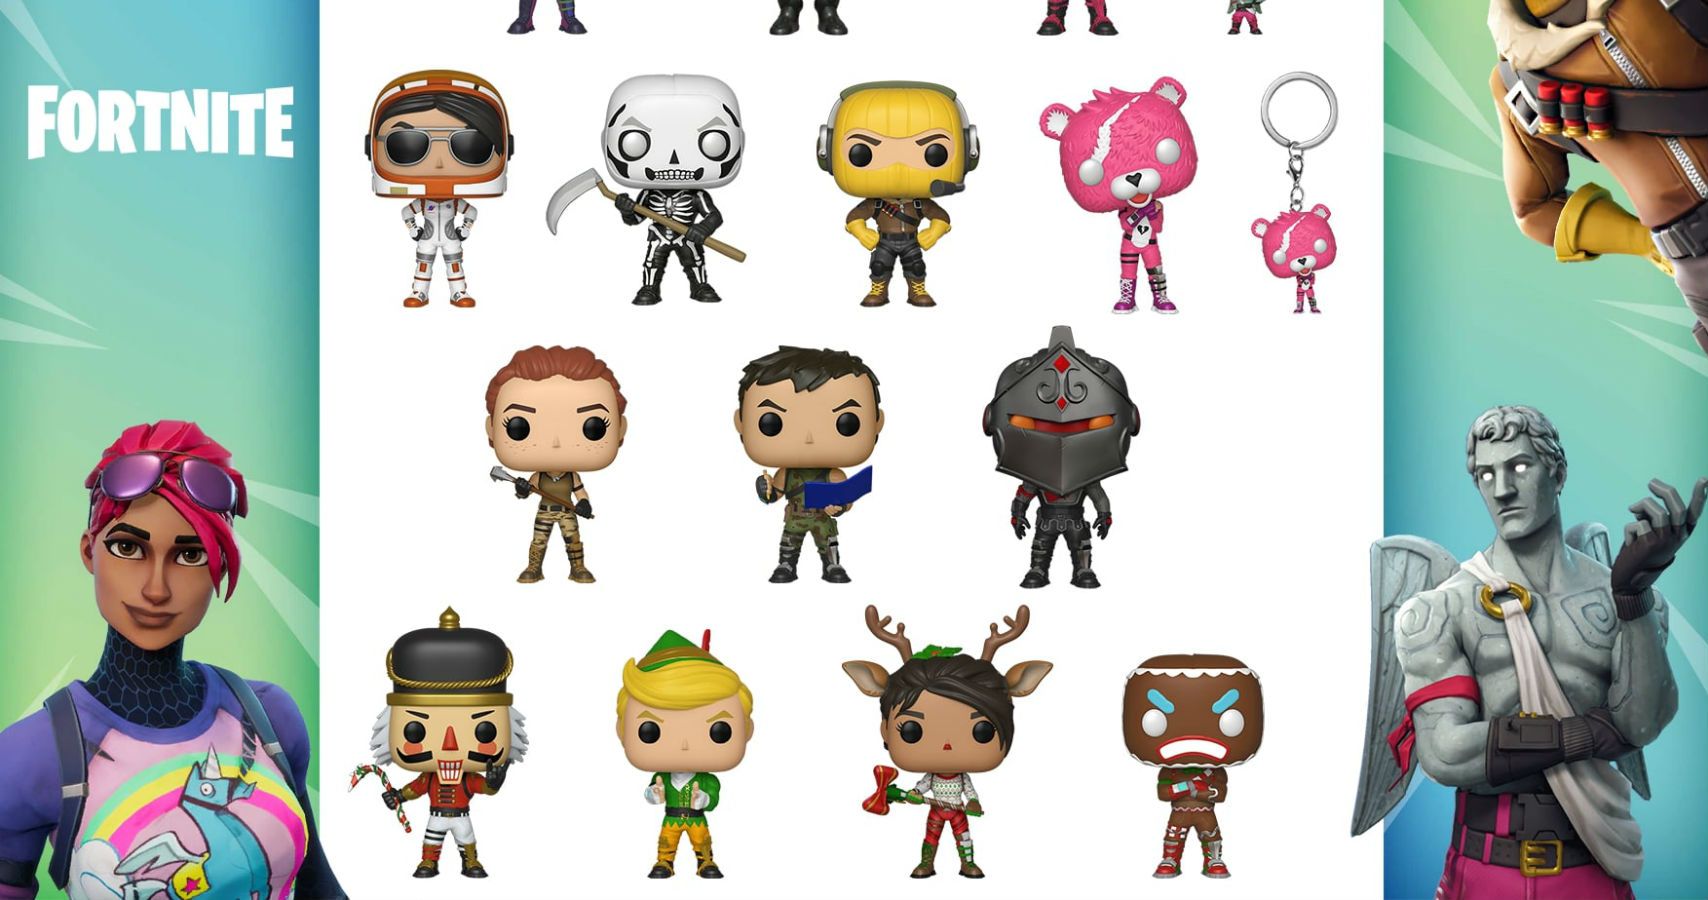 The Fortnite Funko Pop Lineup Is Growing With 4 New Figures - GameSpot